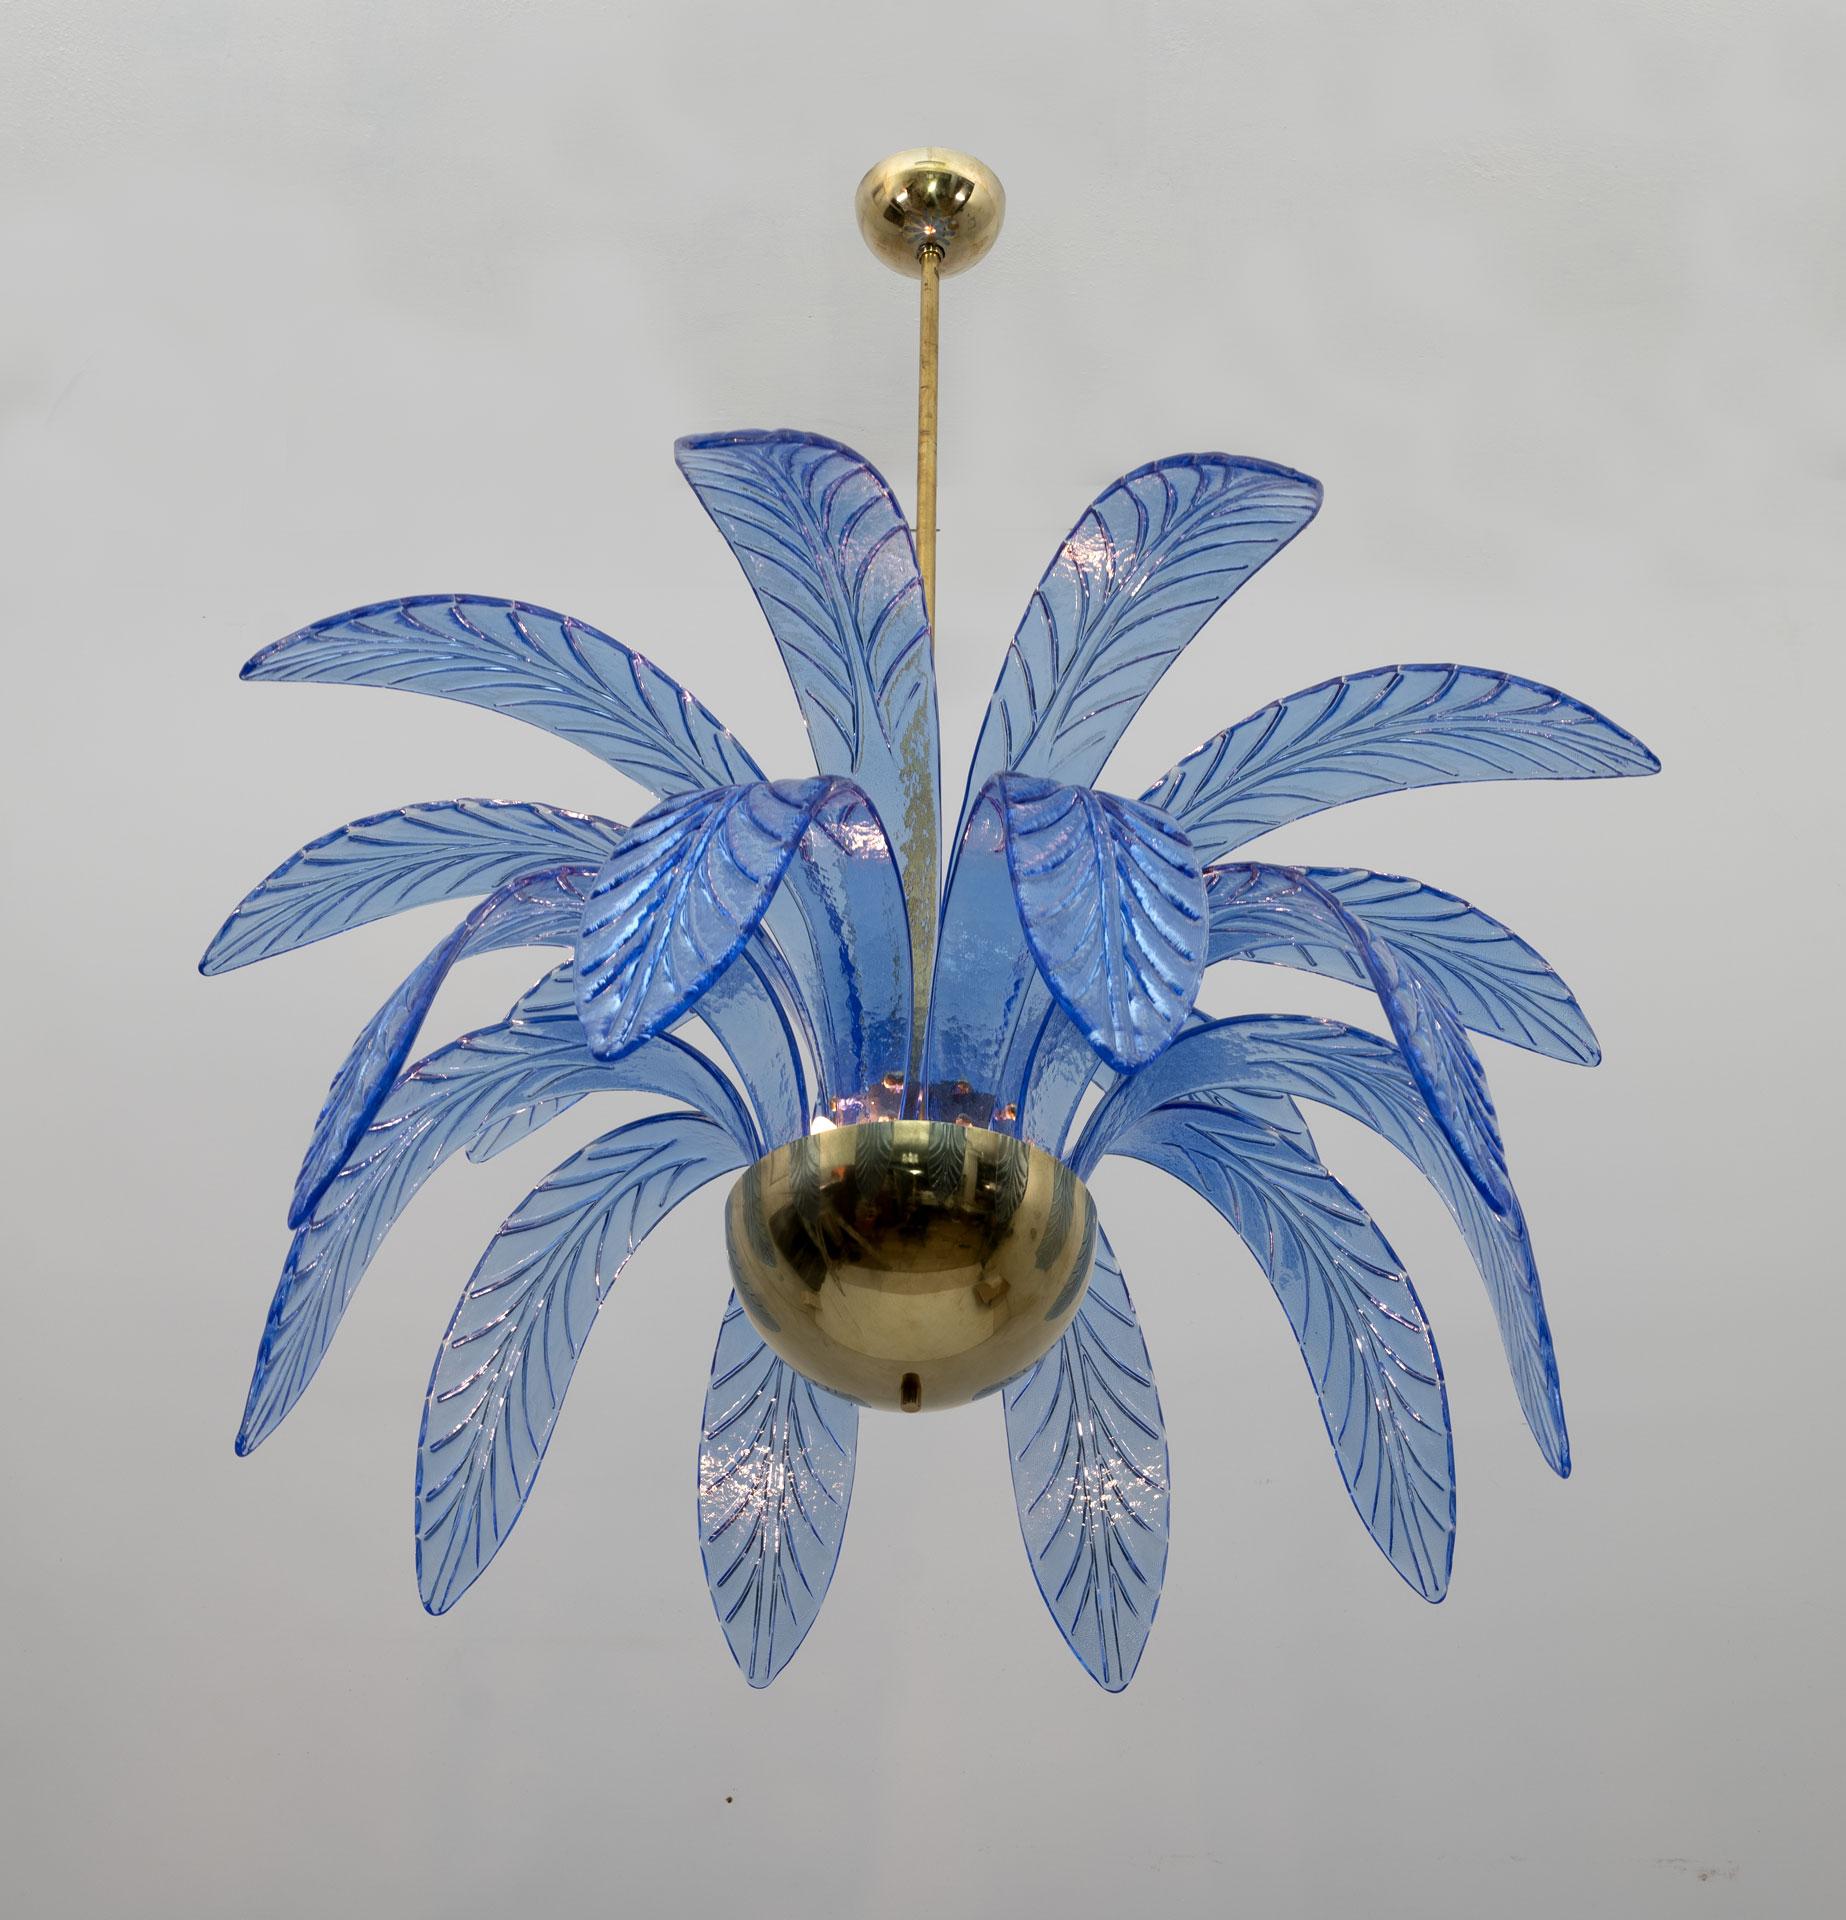 Mouth-blown Murano glass chandelier, light blue Murano glass leaves, brass structure, three light bulbs. The chandelier reproduces the crown of a palm tree. We supply reducers for E12 USA bulbs.